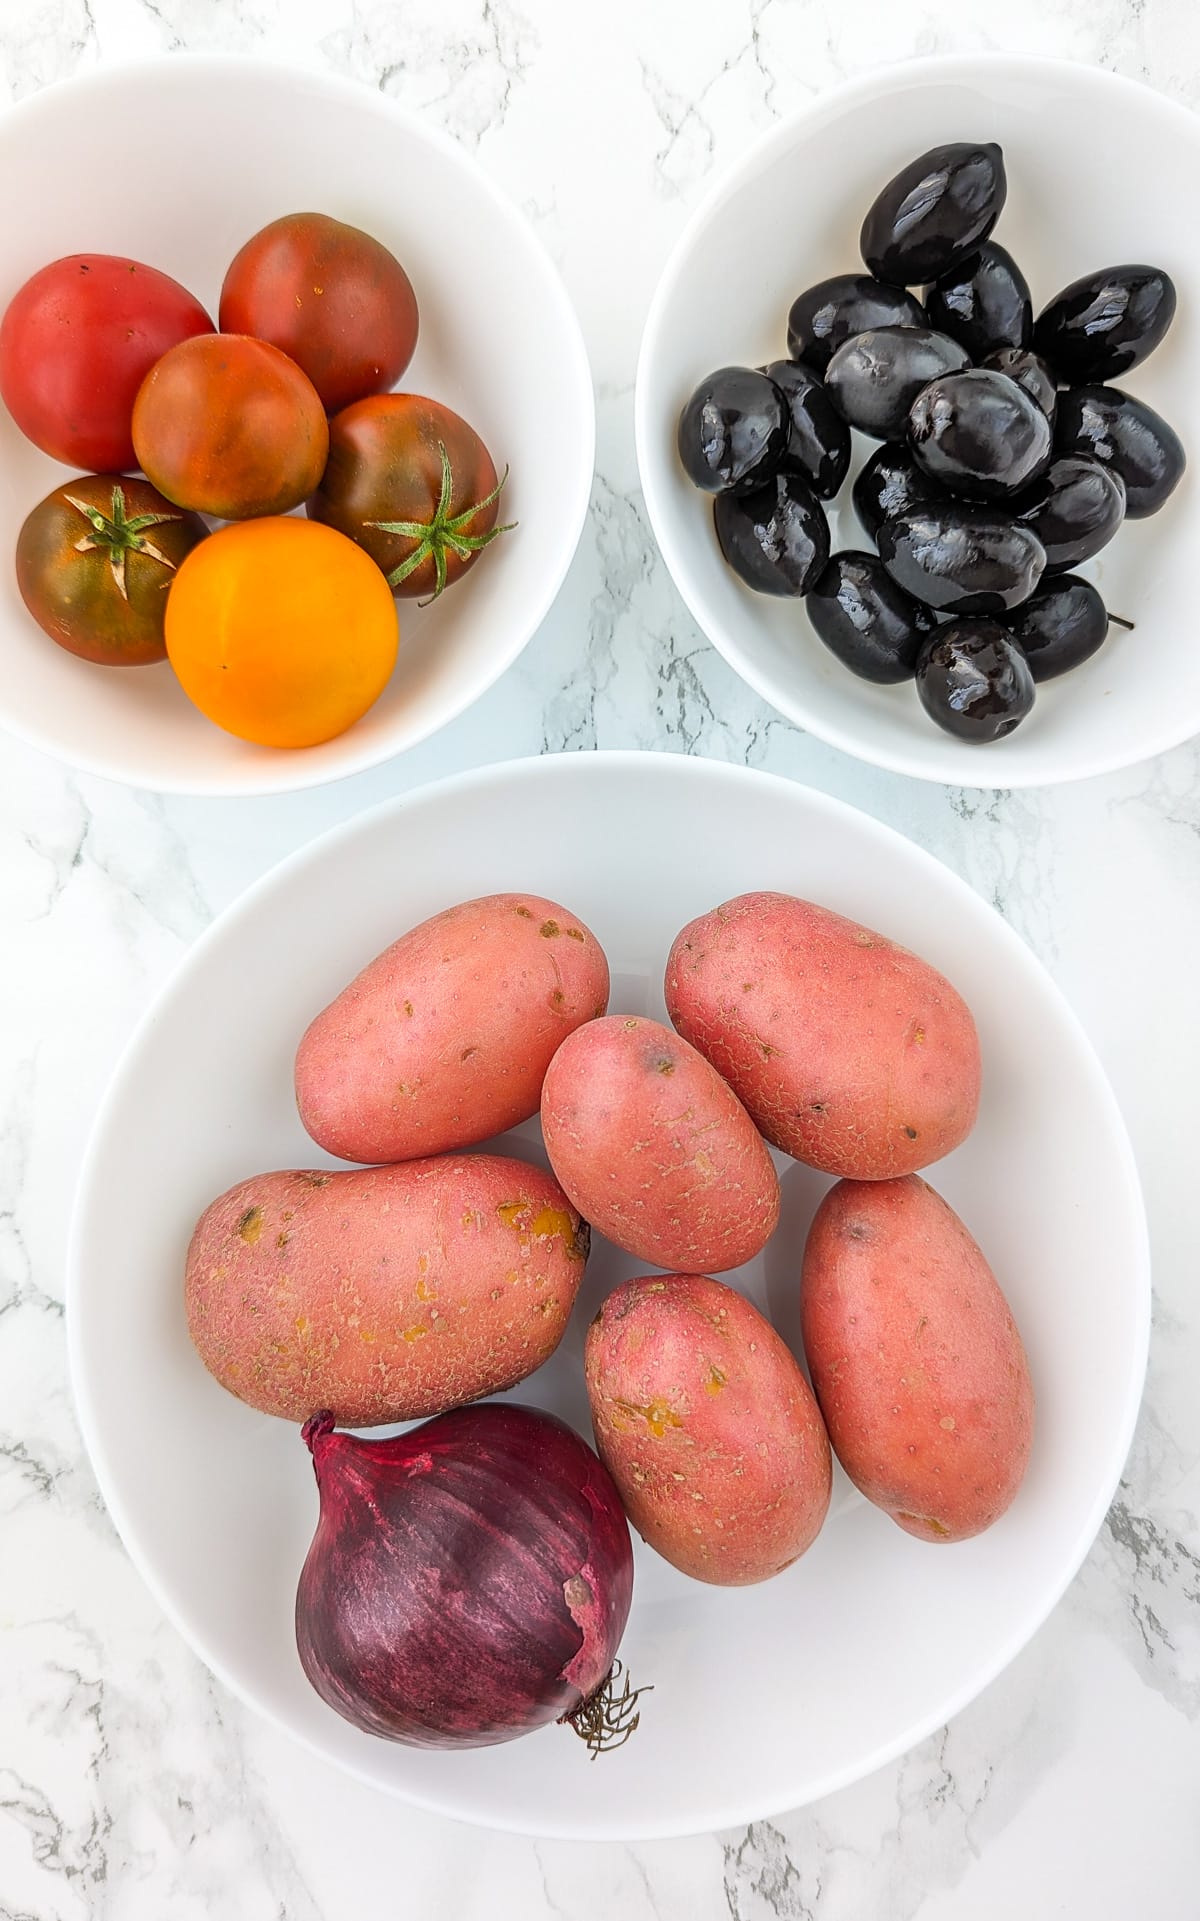 Top view of a plate with red potatoes and onions near a plate of black olives and colorful tomatoes.